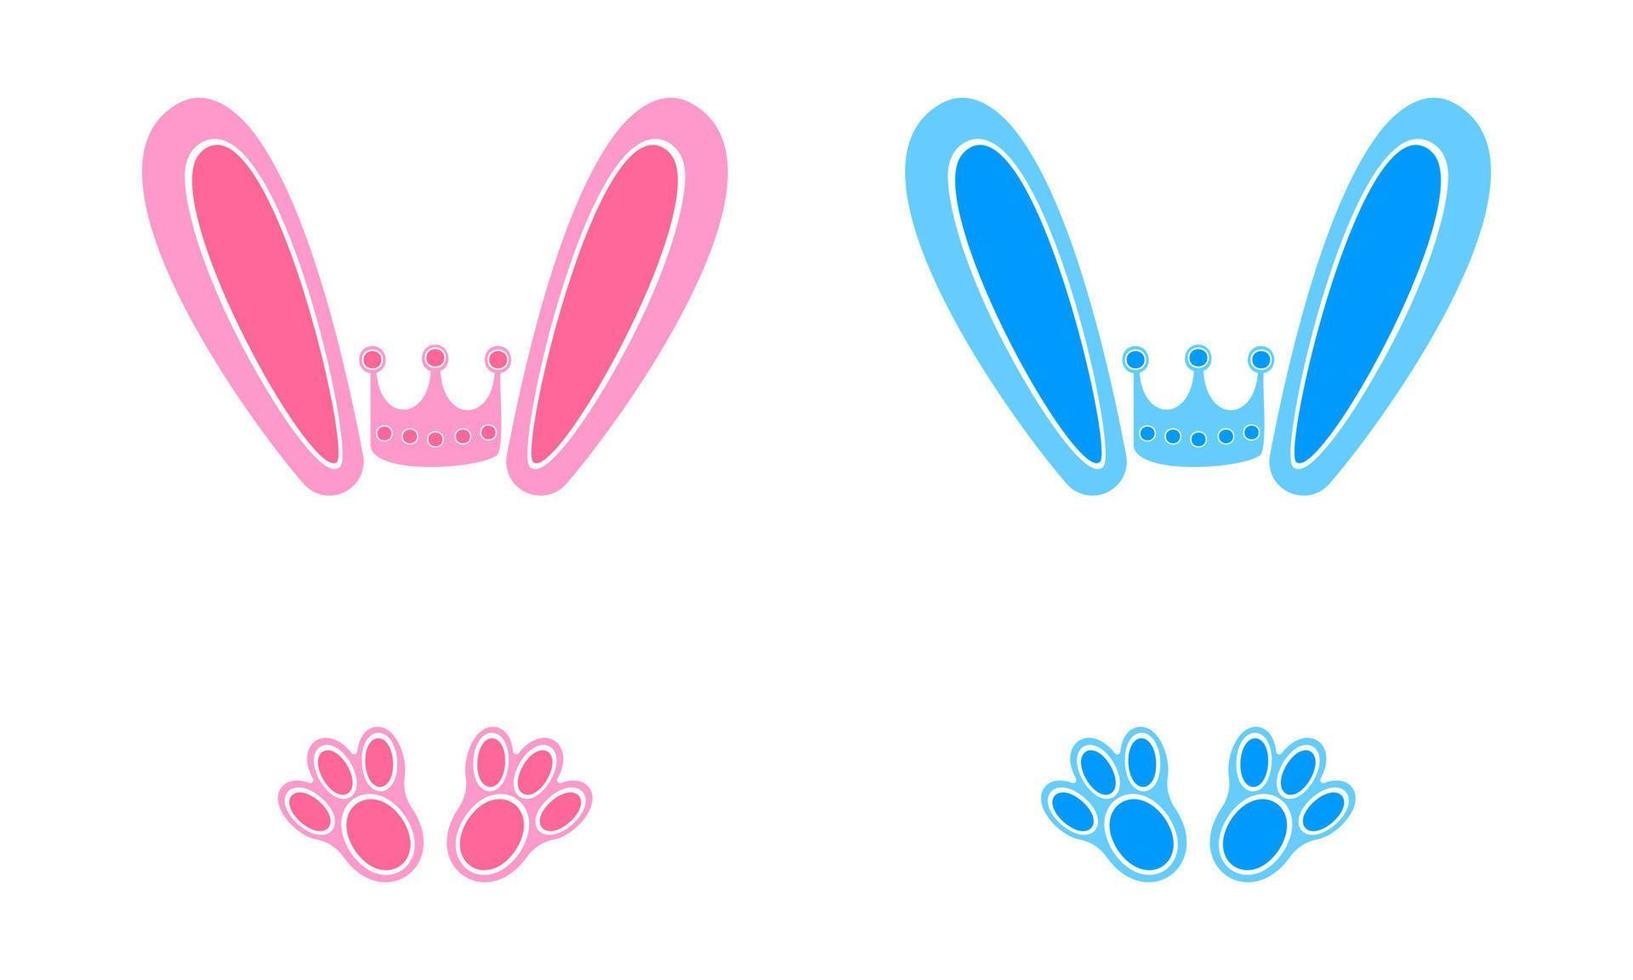 Blue and pink bunny ears and feet with crowns. Design elements for boys and girls Easter or New Year t-shirt, baby shower, greeting card vector